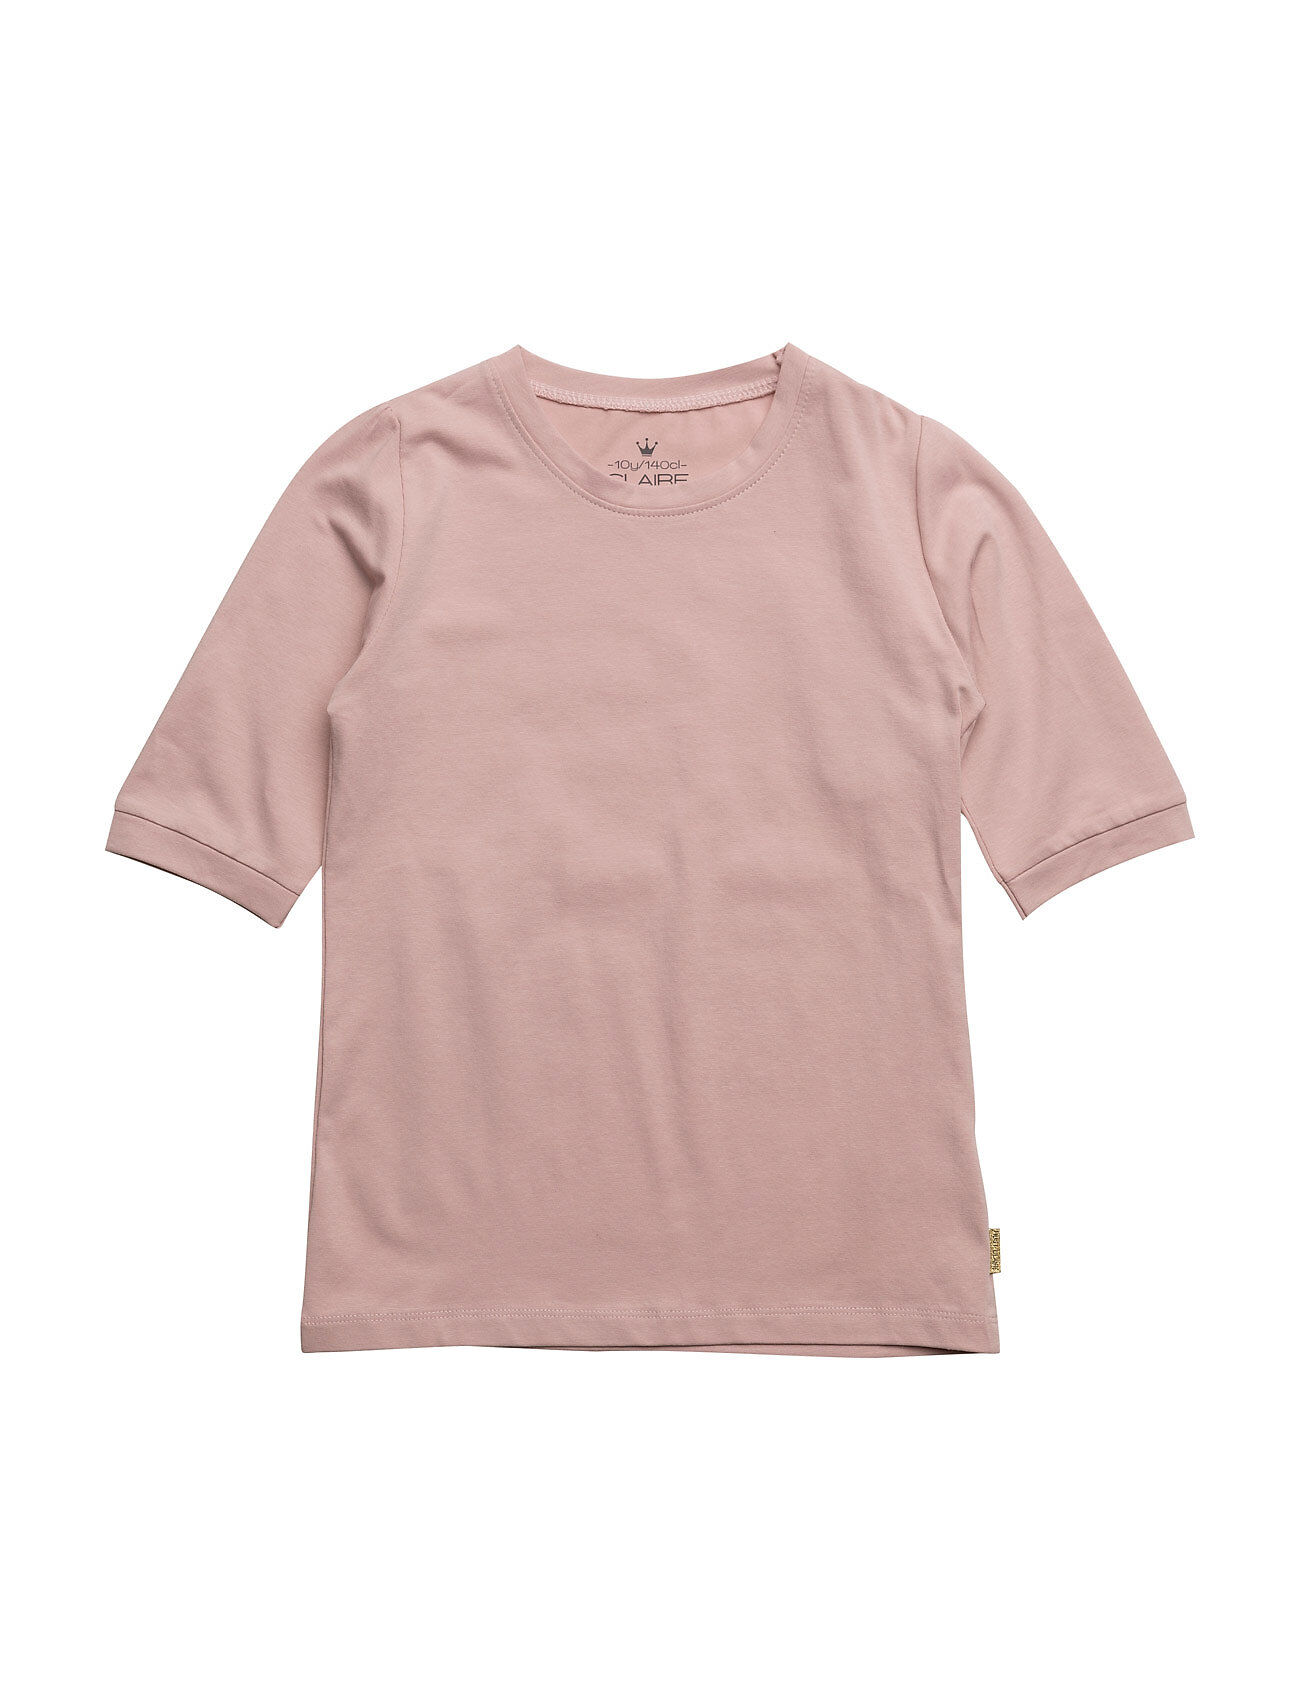 Hust & Claire T-Shirt T-shirts Short-sleeved Rosa Hust & Claire